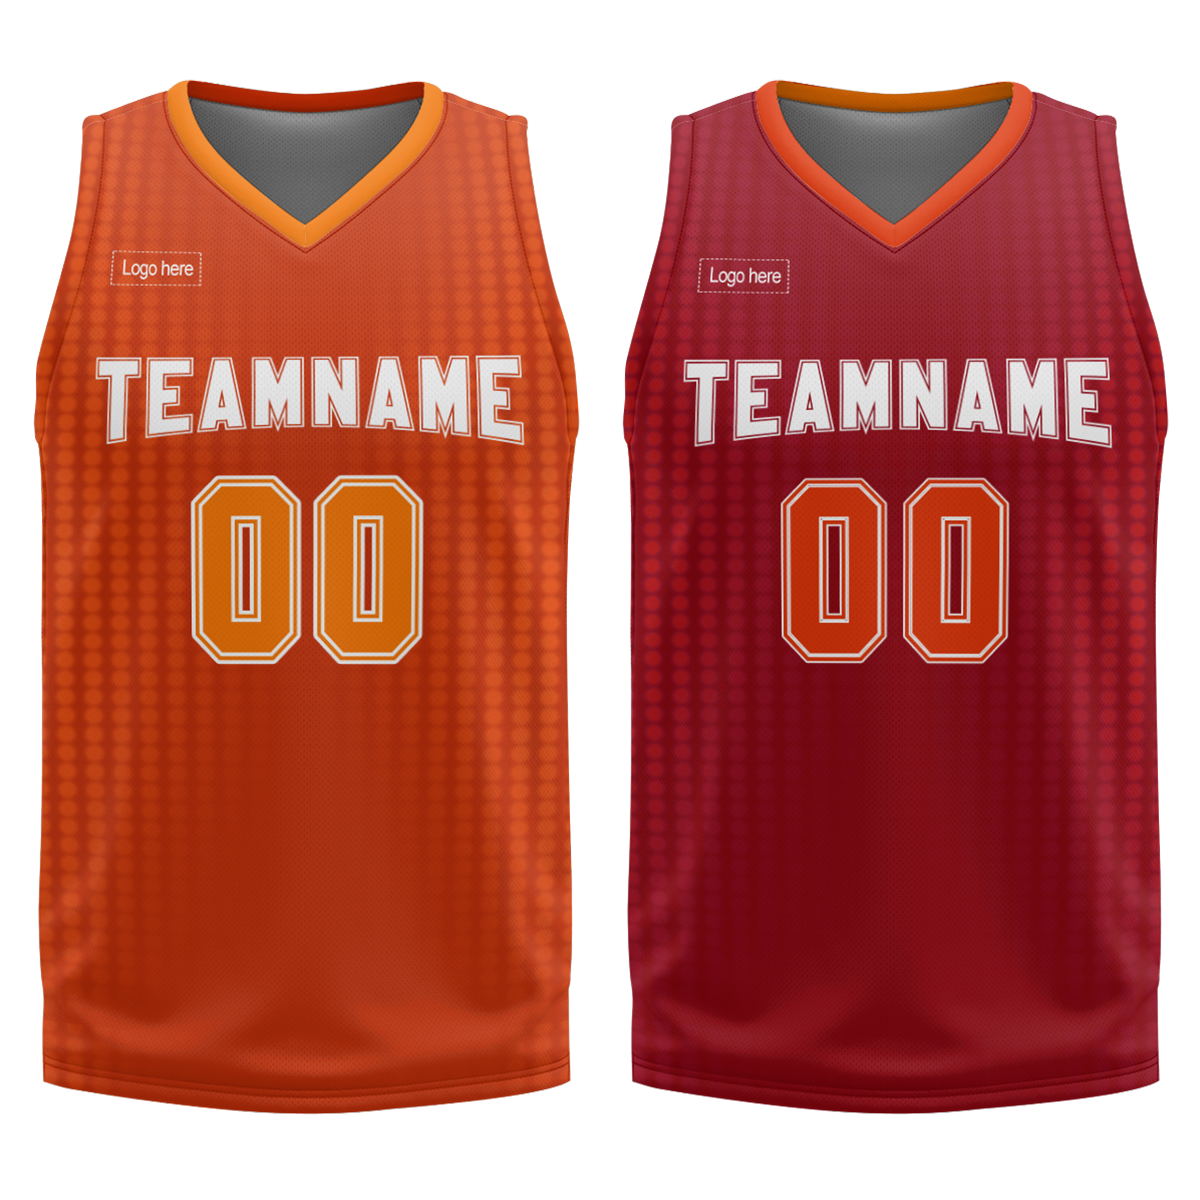 full-sublimation-printing-basketball-uniform-custom-your-own-logo-basketball-jersey-with-oem-service-at-cj-pod-4